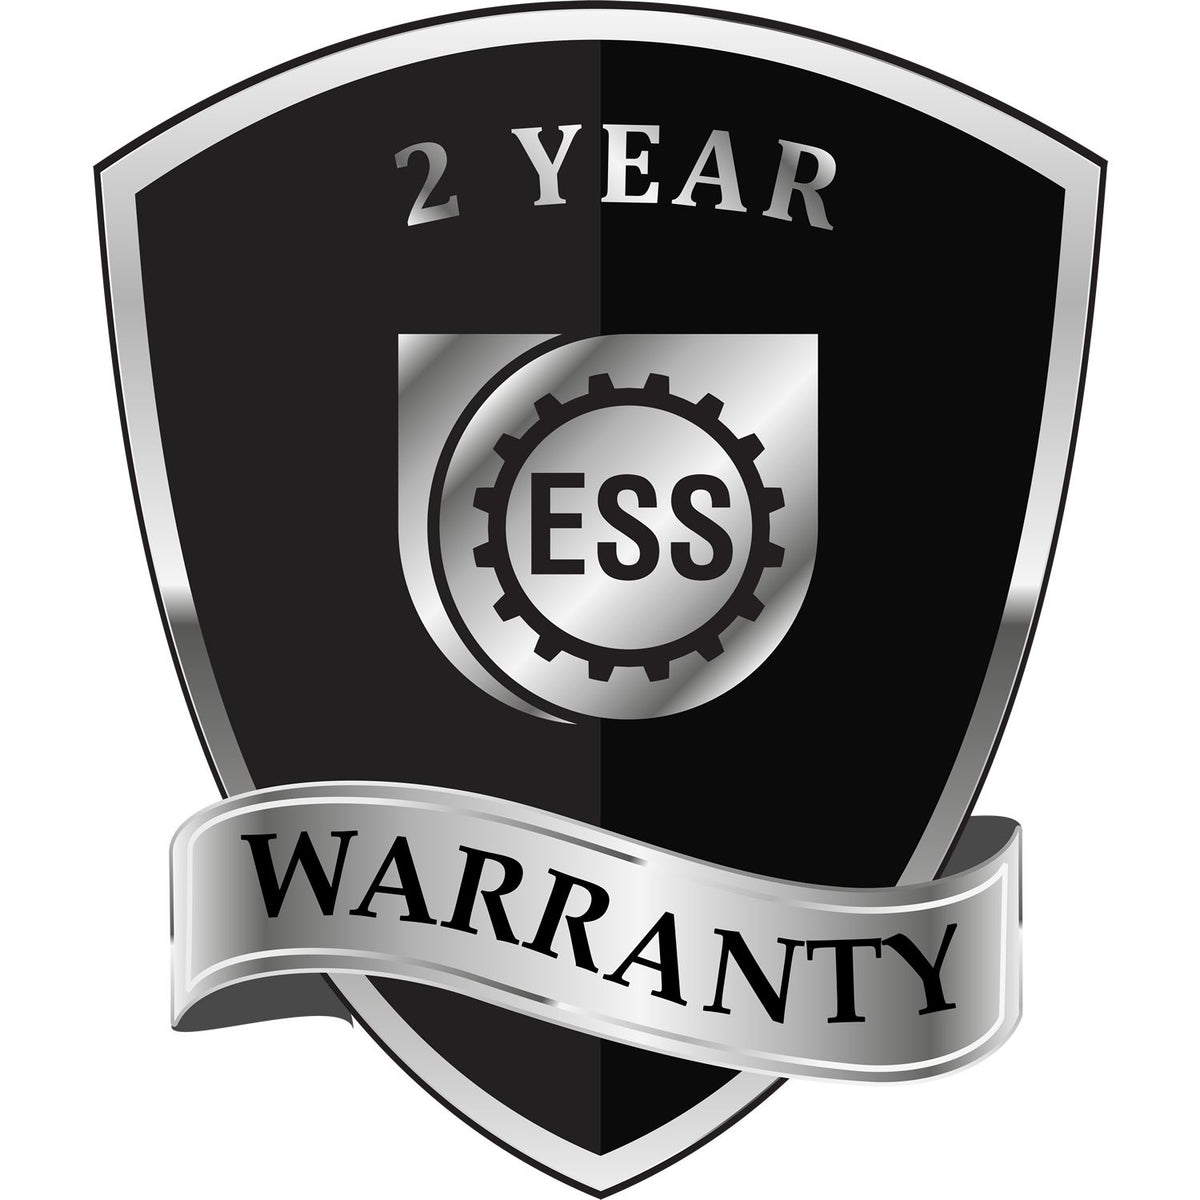 A badge or emblem showing a warranty icon for the Florida Desk Architect Embossing Seal